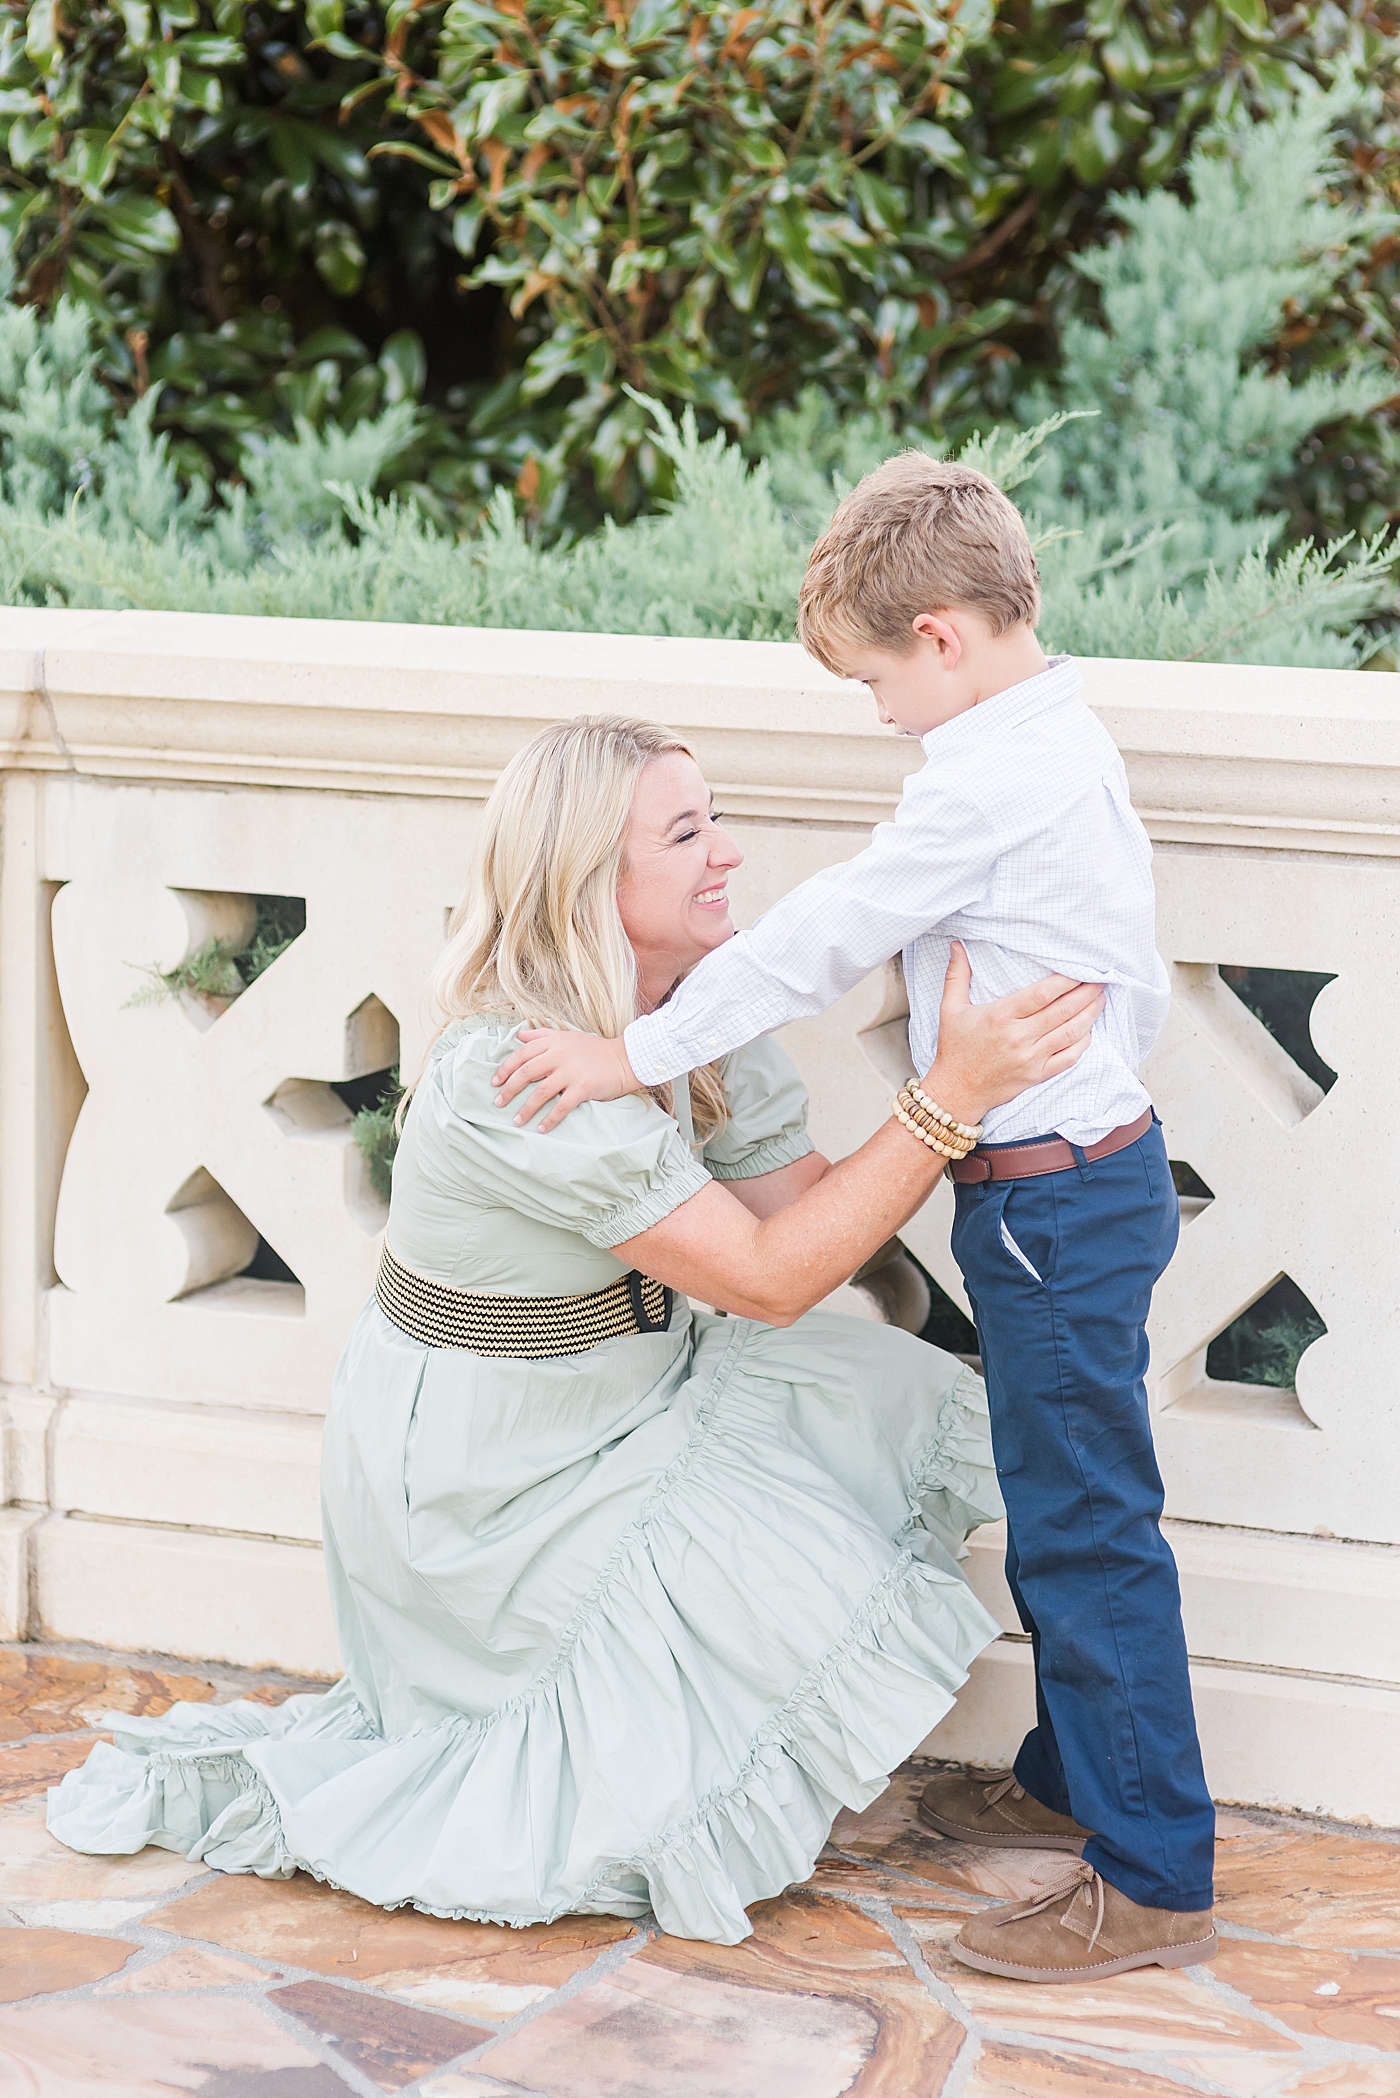 Mom talking to little boy son in the park | Photo by Anna Wisjo Photography